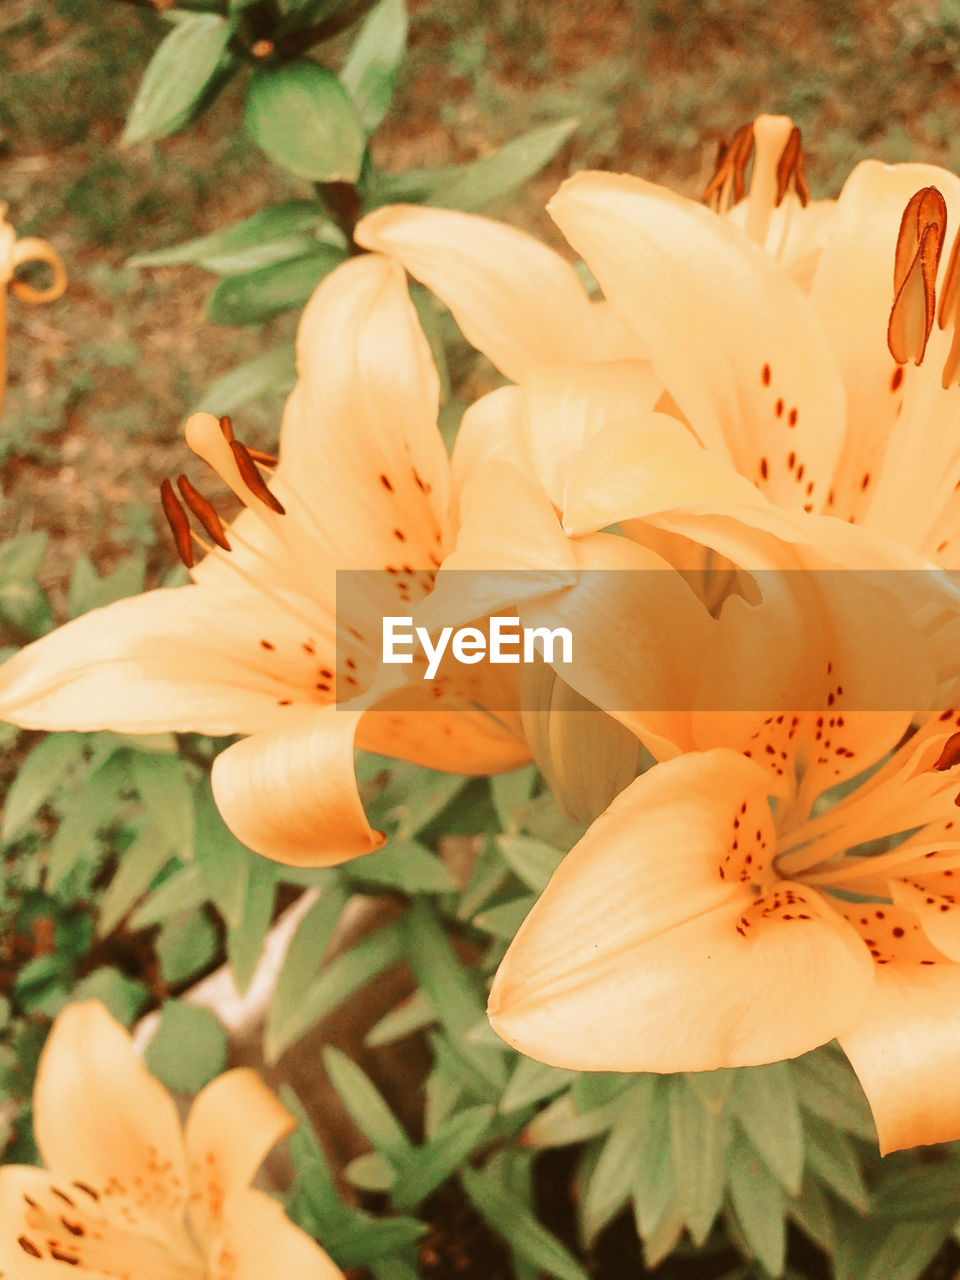 plant, flower, flowering plant, beauty in nature, freshness, lily, petal, fragility, growth, flower head, close-up, inflorescence, nature, pollen, stamen, botany, no people, focus on foreground, blossom, springtime, outdoors, orange color, yellow, day, leaf